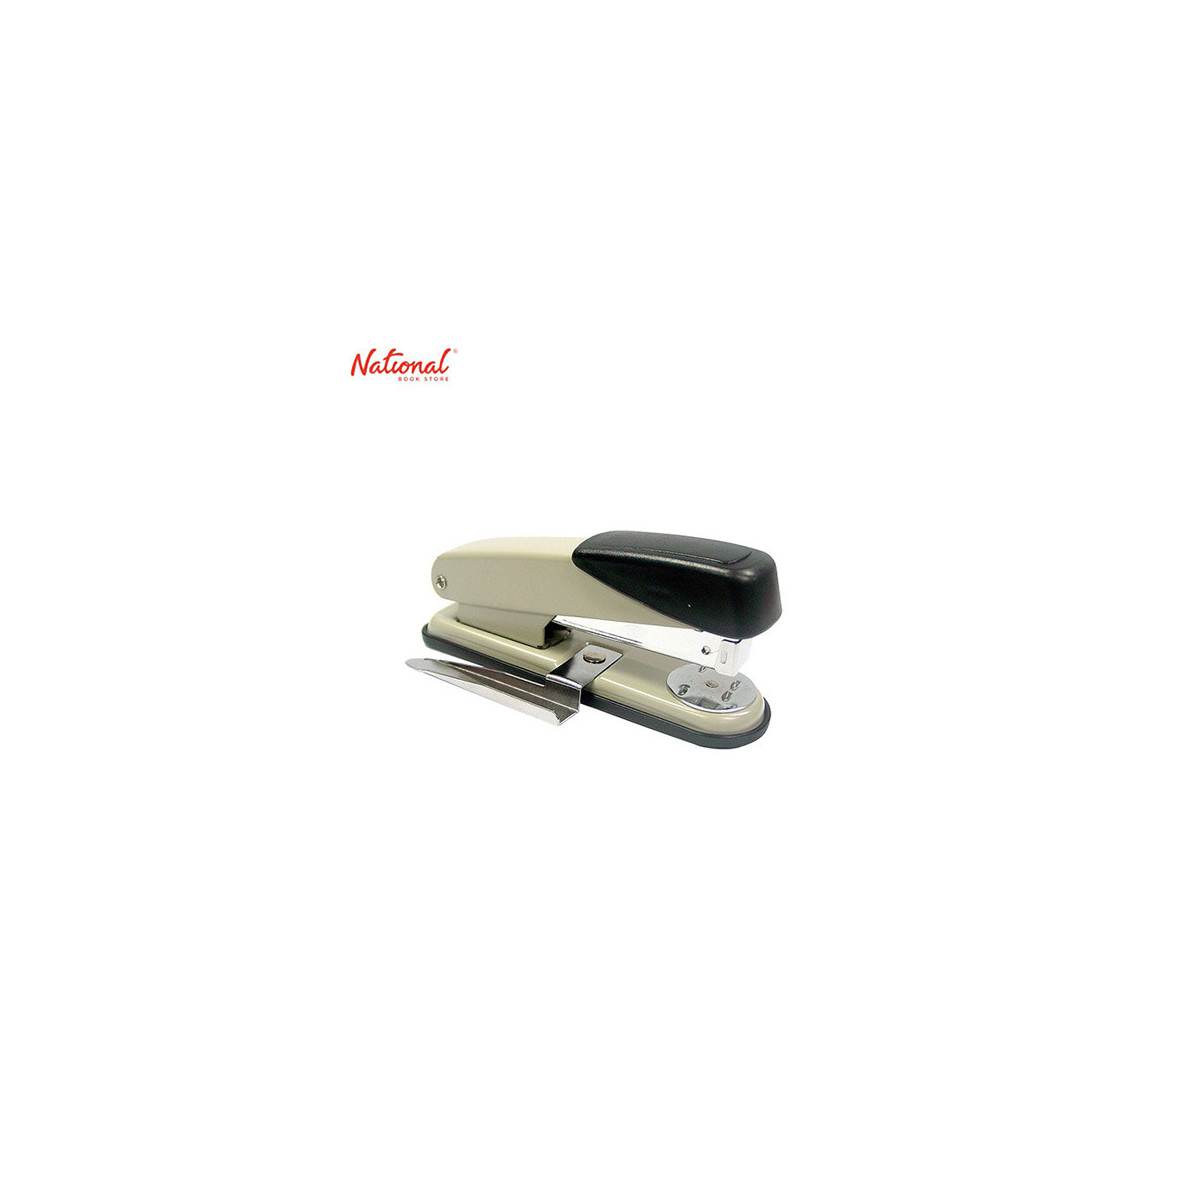 GENMES STAPLER NO.35 E508 5526 WITH REMOVER